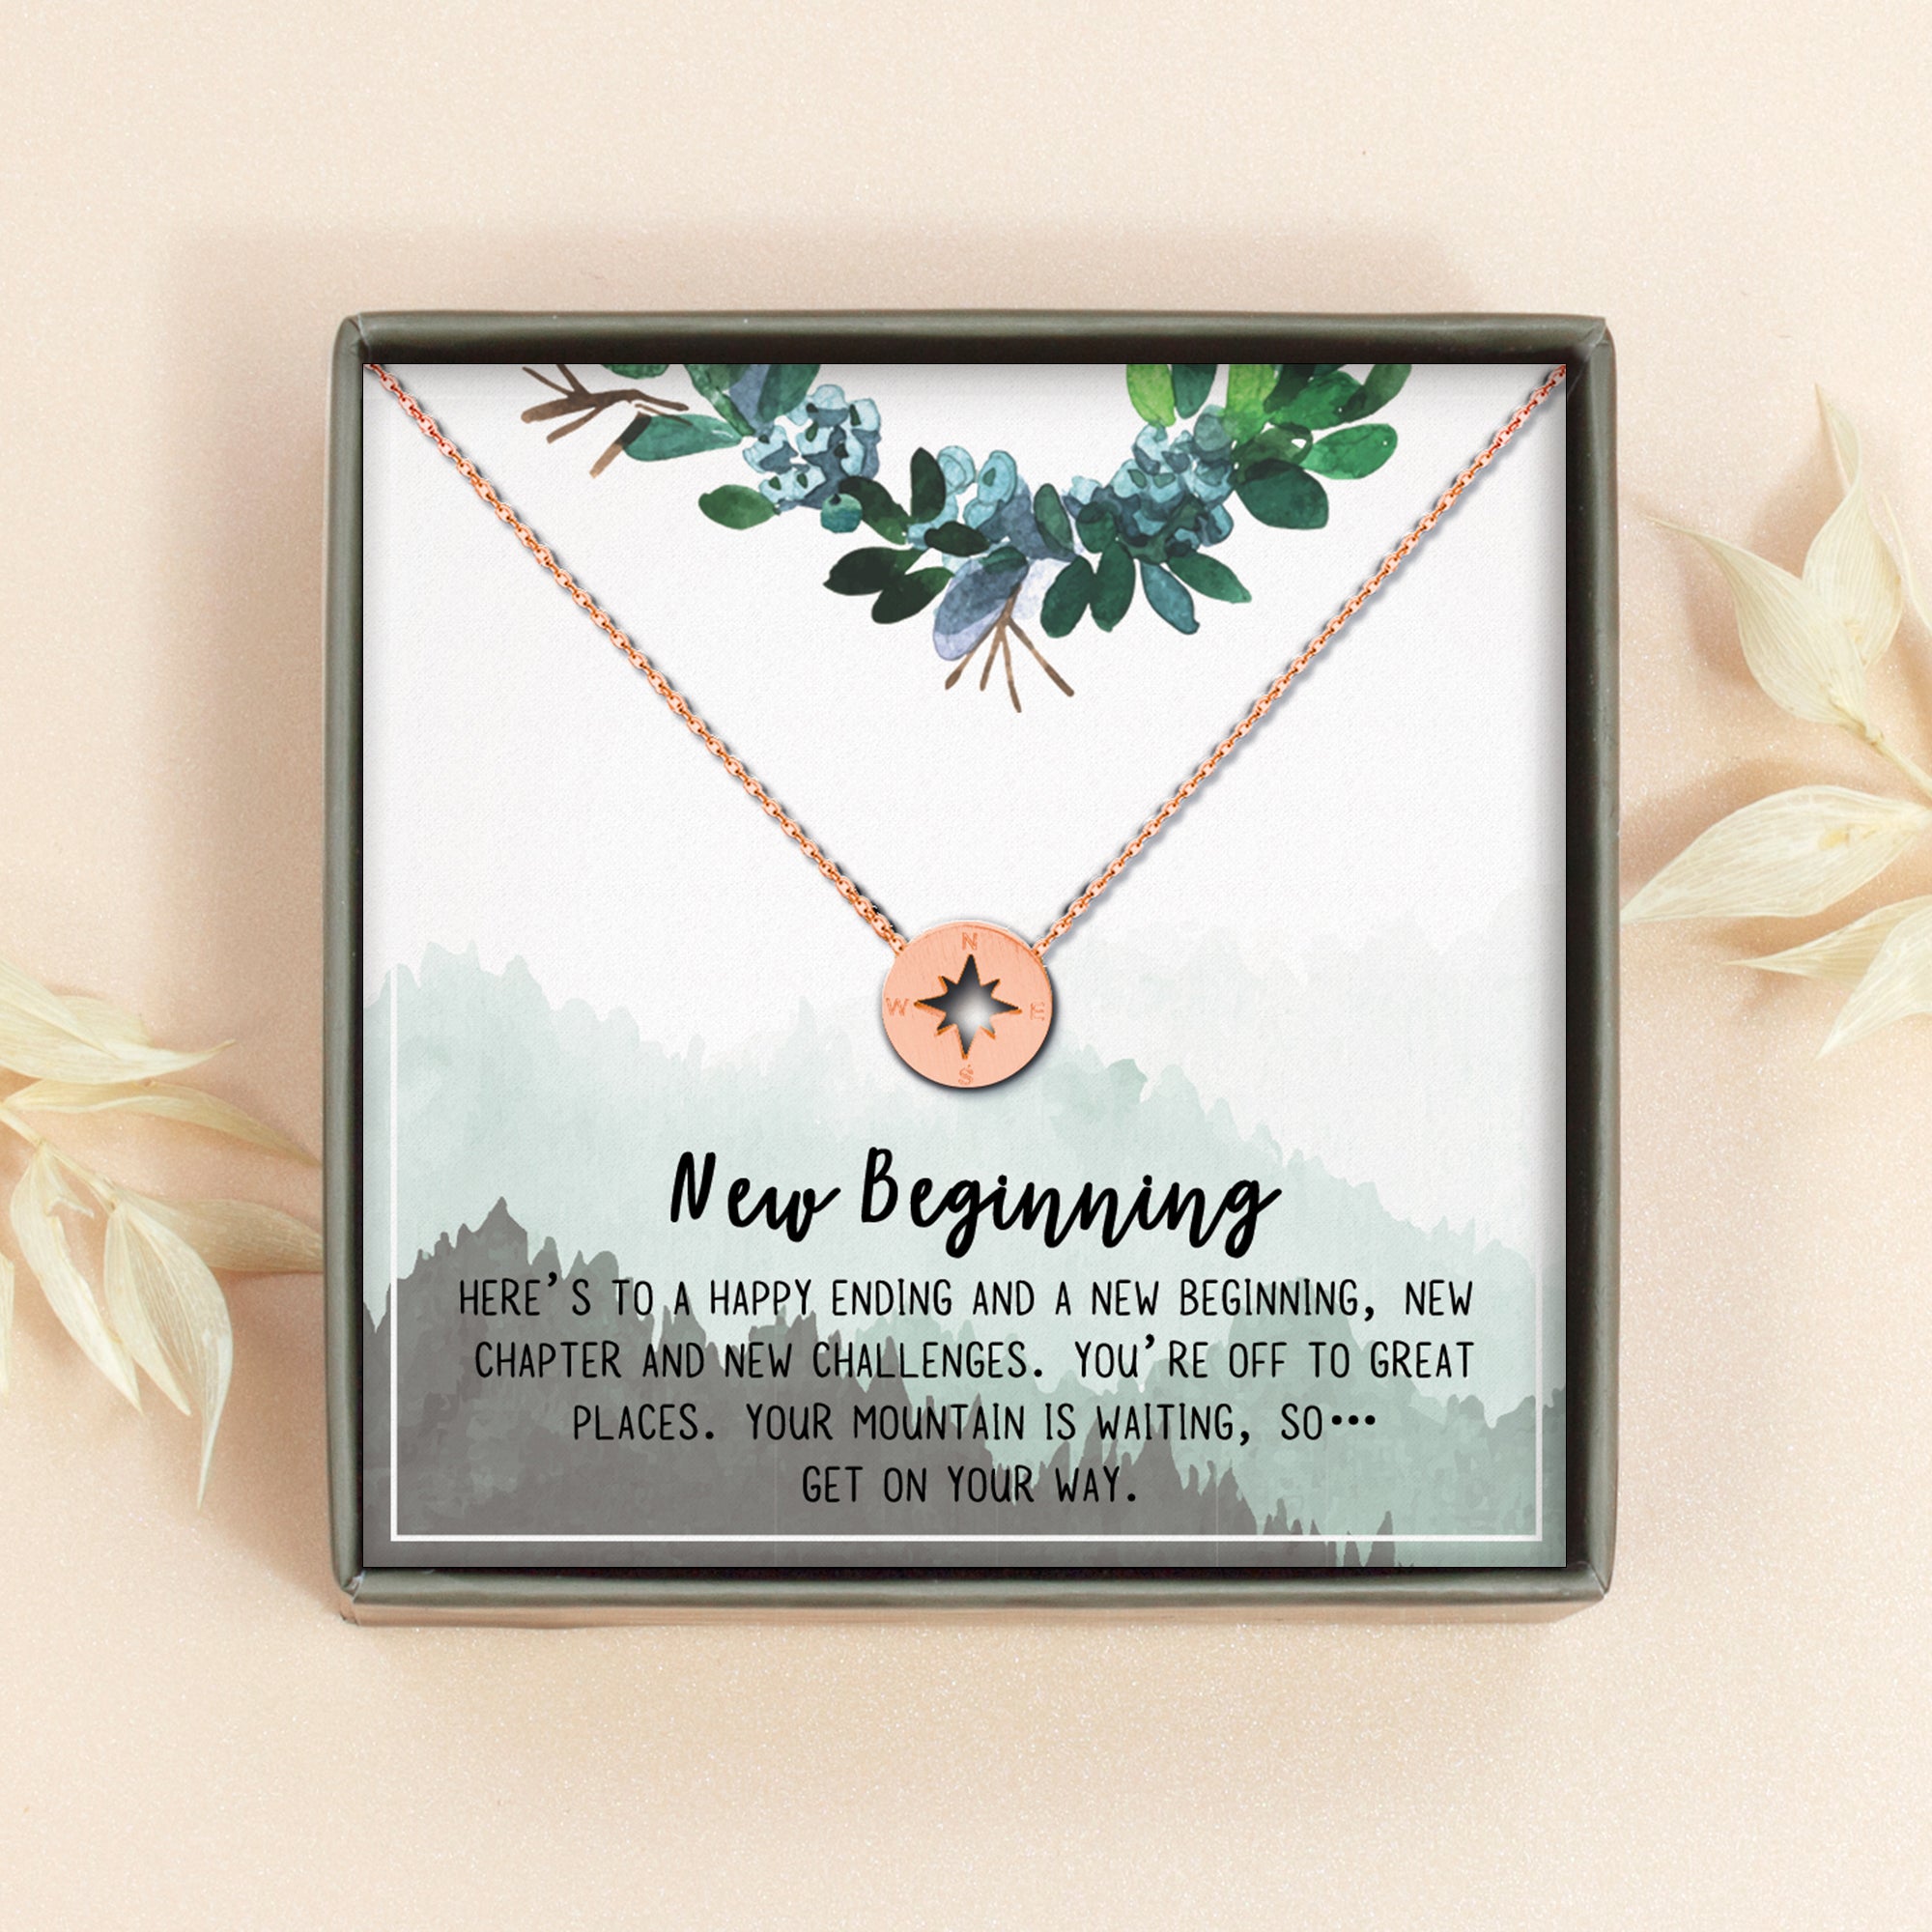 Anavia Best Friend Necklace, Friendship Jewelry, Best Friend Gifts, Gift for Friend, Birthday Gift, Christmas Gift for Her, Cube Pendant Necklace with